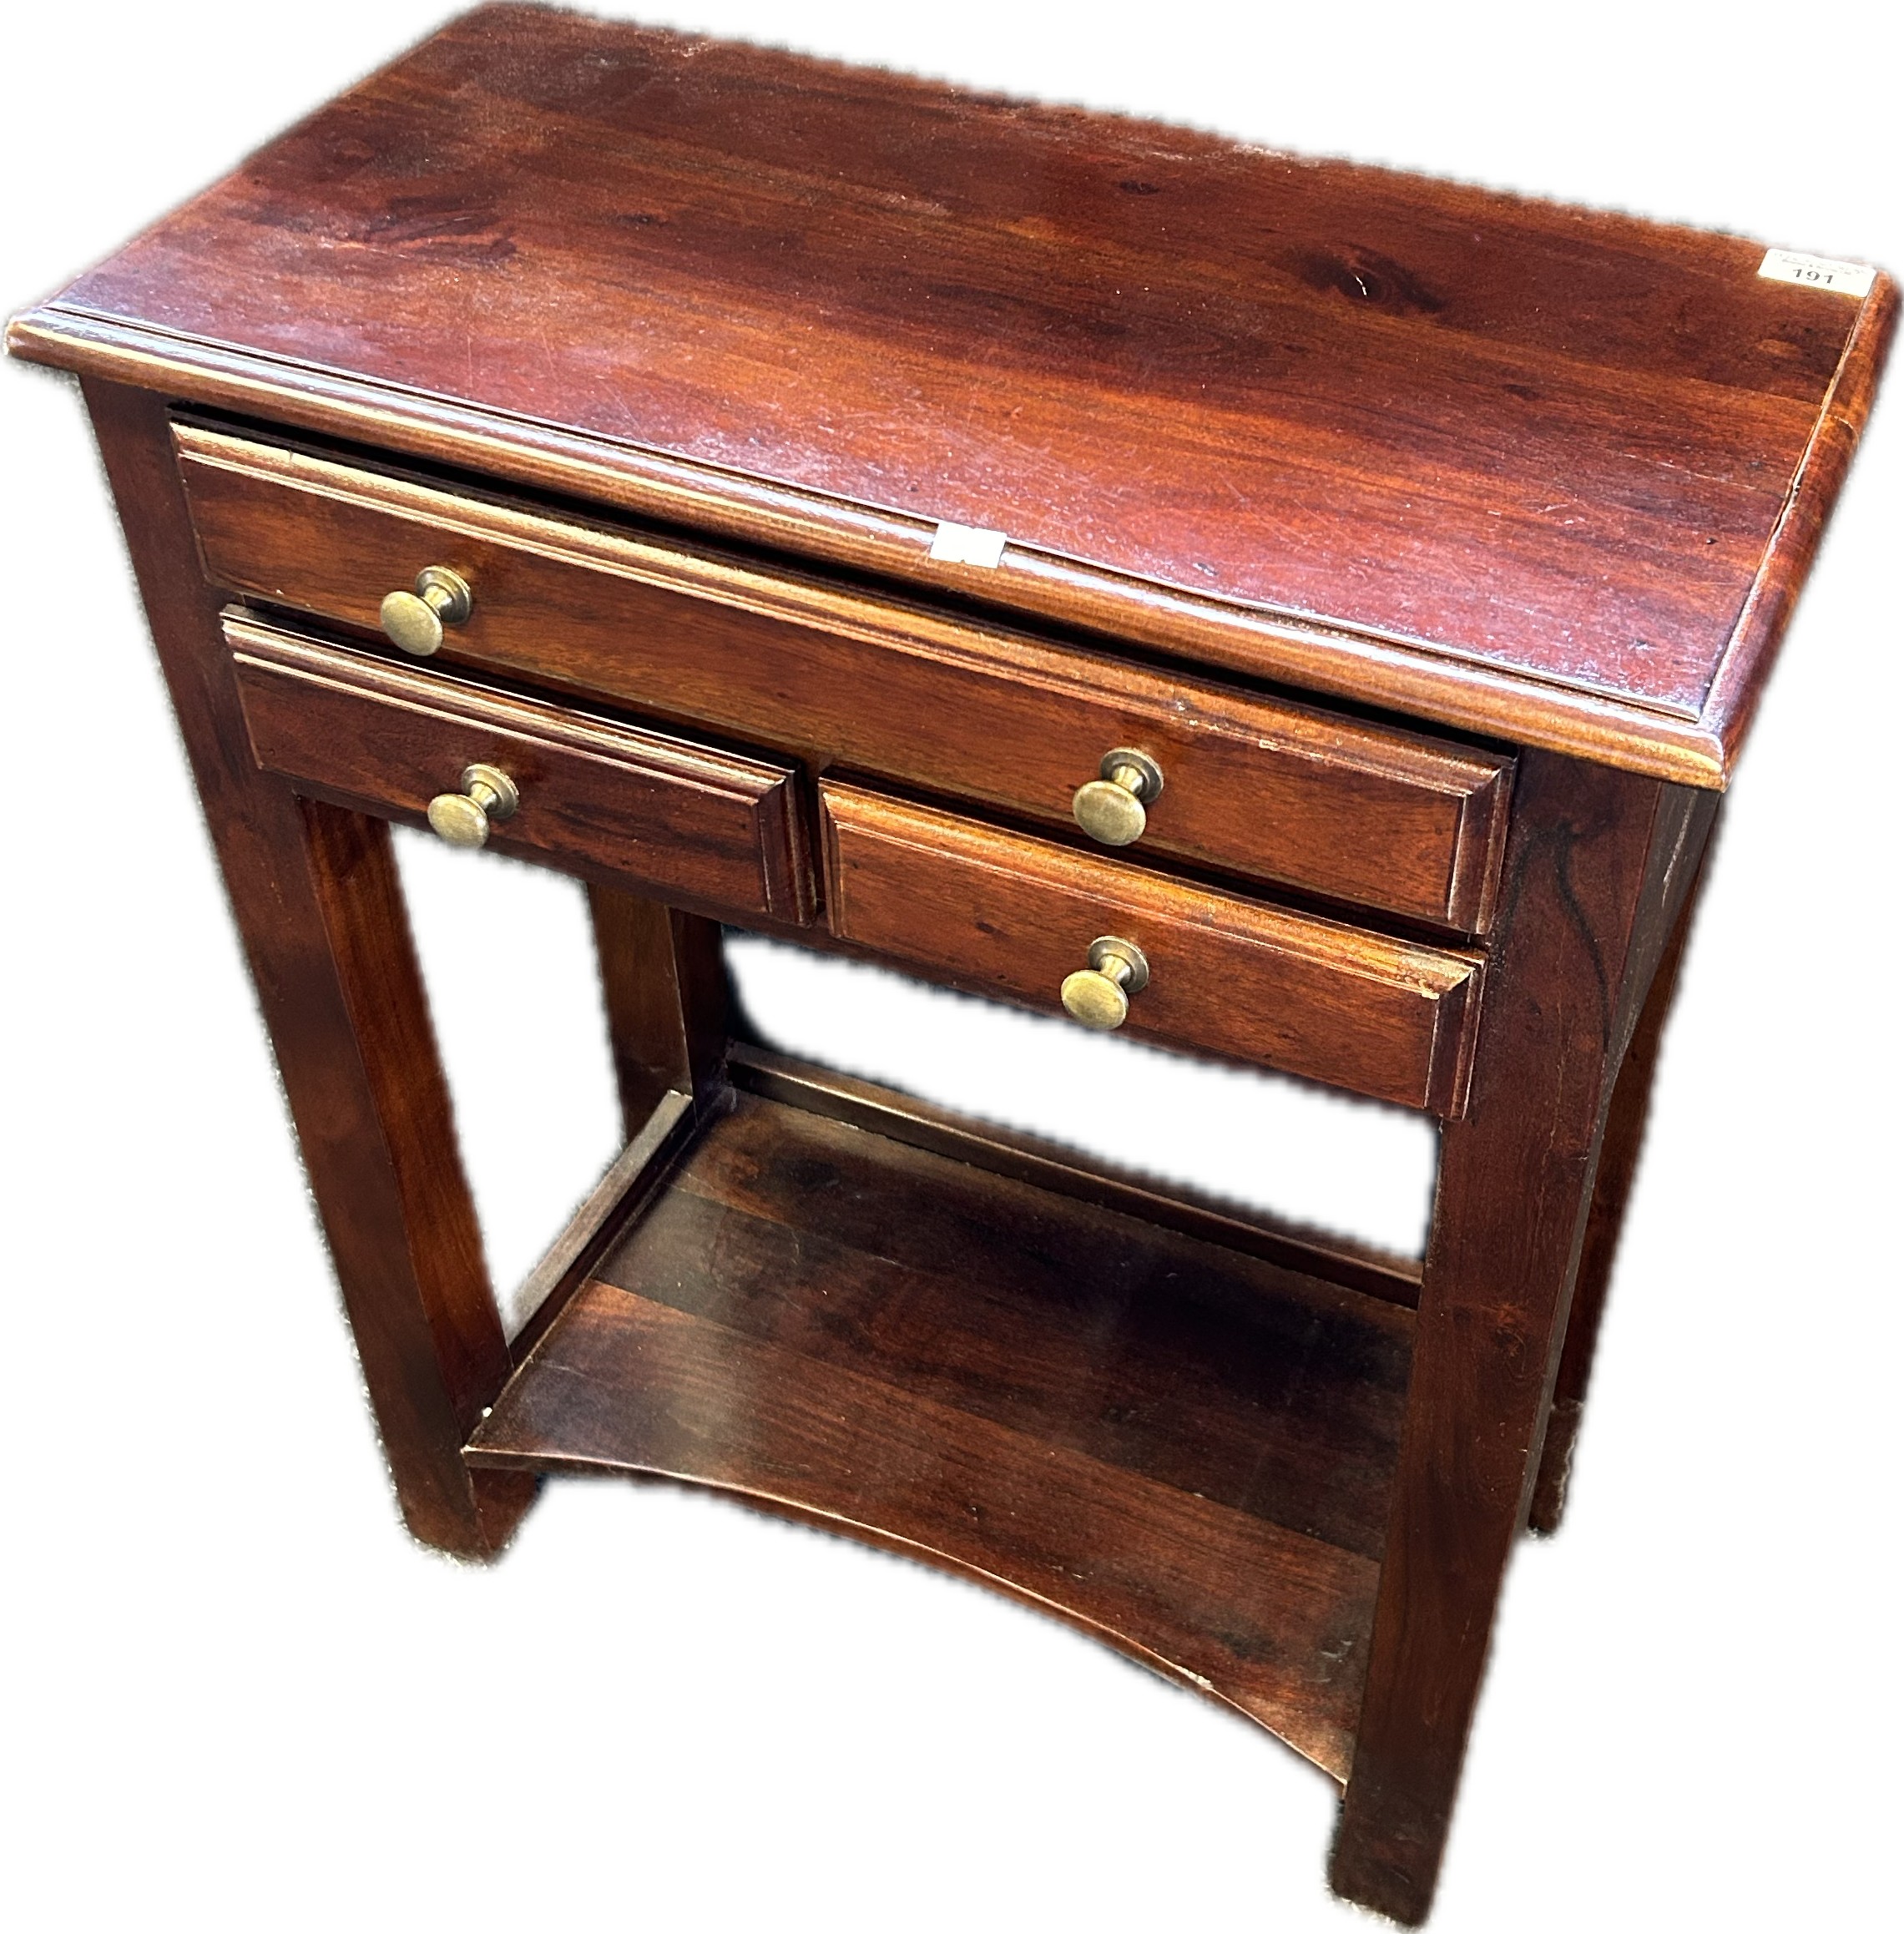 Reproduction mahogany side unit, with an arrangement of three drawers and a lower supporting - Image 2 of 3